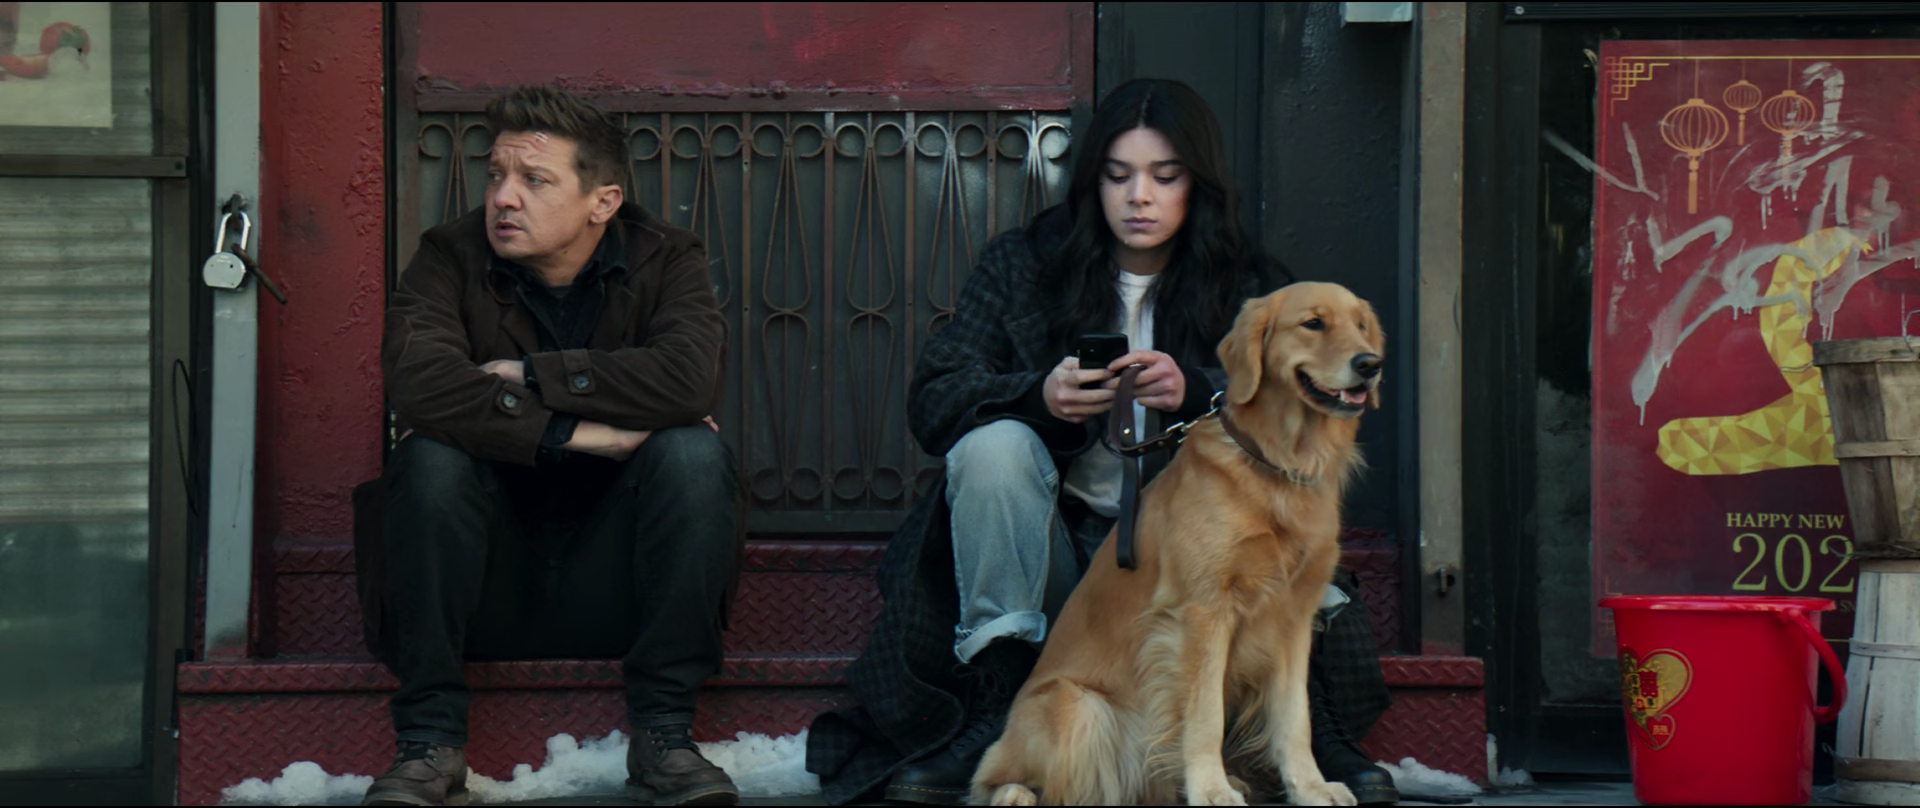 Clint_Barton,_Kate_Bishop_&_Lucky_the_Pizza_Dog